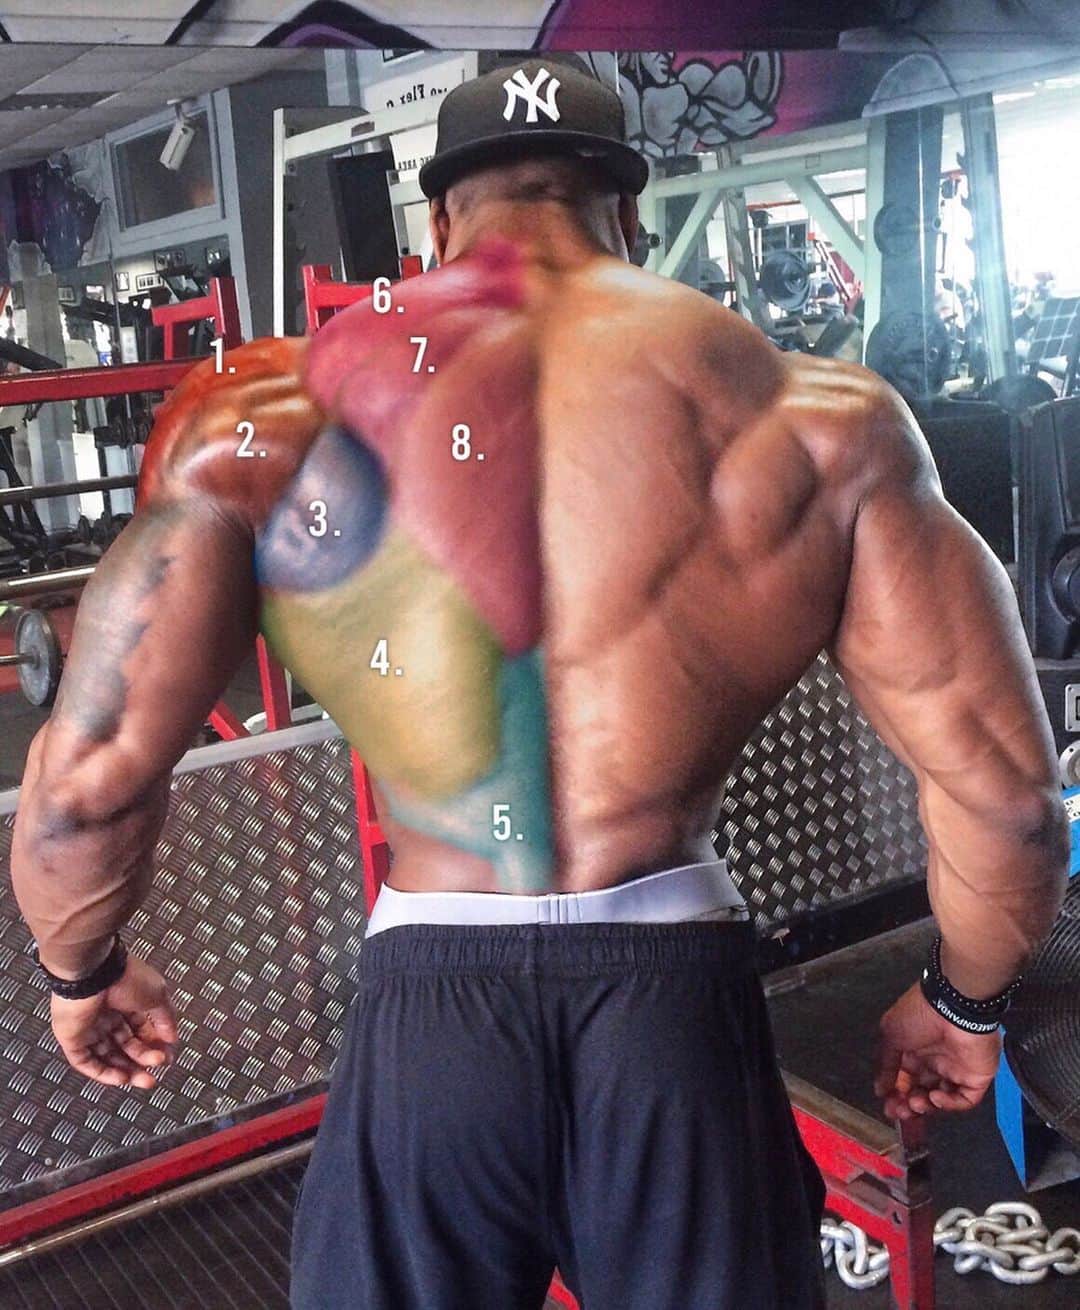 Simeon Pandaさんのインスタグラム写真 - (Simeon PandaInstagram)「8 exercises to 🎯 your back & shoulders⁣. Definitely Tag & Save for later! ⁣ ⁣ ℹ️ Refer to slide 2 to see the muscles being targeted in each video by number:⁣ ⁣ 🎥 3: Lateral Raise ⁣ Primary 🎯: (1) Medial Deltoids⁣ Secondary Muscles: (2) Posterior Deltoids⁣ (Also hits the anterior deltoid not shown)⁣ ⁣ 🎥 4: Military Press⁣ Primary 🎯: (1) Anterior & Medial Deltoids⁣ Secondary Muscles: Upper Chest⁣ ⁣ 🎥 5: Face Pulls & Shrugs Superset⁣ Primary 🎯: (3) Posterior Deltoids⁣ Secondary Muscles: (3, 6, 7 & 8)⁣ Infraspinatus, Teres Major & Minor, Trapezius.⁣ ⁣ 🎥 6: Single Arm Row⁣ Primary 🎯: (4) Latissimus Dorsi⁣ Secondary Muscles: (2, 3, 5, 6, 7 & 8)⁣ Trapezius, teres major and minor, posterior deltoids, infraspinatus⁣ ⁣ 🎥 7: Back 21’s High & Middle Row + Straight Arm Pulldown ⁣ Primary 🎯: (2, 3, 4, 6, 7 & 8) ⁣ Almost all back & Shoulder muscles. ⁣ ⁣ 🎥 8: Rear Delt Row⁣ Primary 🎯: (2) Posterior Deltoid⁣ Secondary Muscles: (3, 6, 7 & 8)⁣ Trapezius, teres major and minor, infraspinatus.⁣ ⁣ 🎥 9: Seated Rope Pulldown⁣ Primary 🎯: (4) Latissimus Dorsi⁣ Secondary Muscles: (3) Teres major and minor, infraspinatus.⁣ ⁣ 🎥 10: Dumbbell Stiff-Legged Deadlift⁣ Primary 🎯: (5) Erector Spinae & Hamstrings⁣ ⁣ For FREE diet tips and training routines, or to download programs 📲 Visit my website: SIMEONPANDA.COM⁣⁣⁣ ⁣ ⁣ 🎥 I want to help you train! Visit my YouTube Channel: YouTube.com/simeonpanda⁣ ⁣ 💊 Follow @innosupps ⚡️ for the supplements I use👌🏾⁣⁣⁣ ⁣ #simeonpanda #backworkout #shouldersworkout #backexercises #shouldersexercises」1月24日 4時06分 - simeonpanda